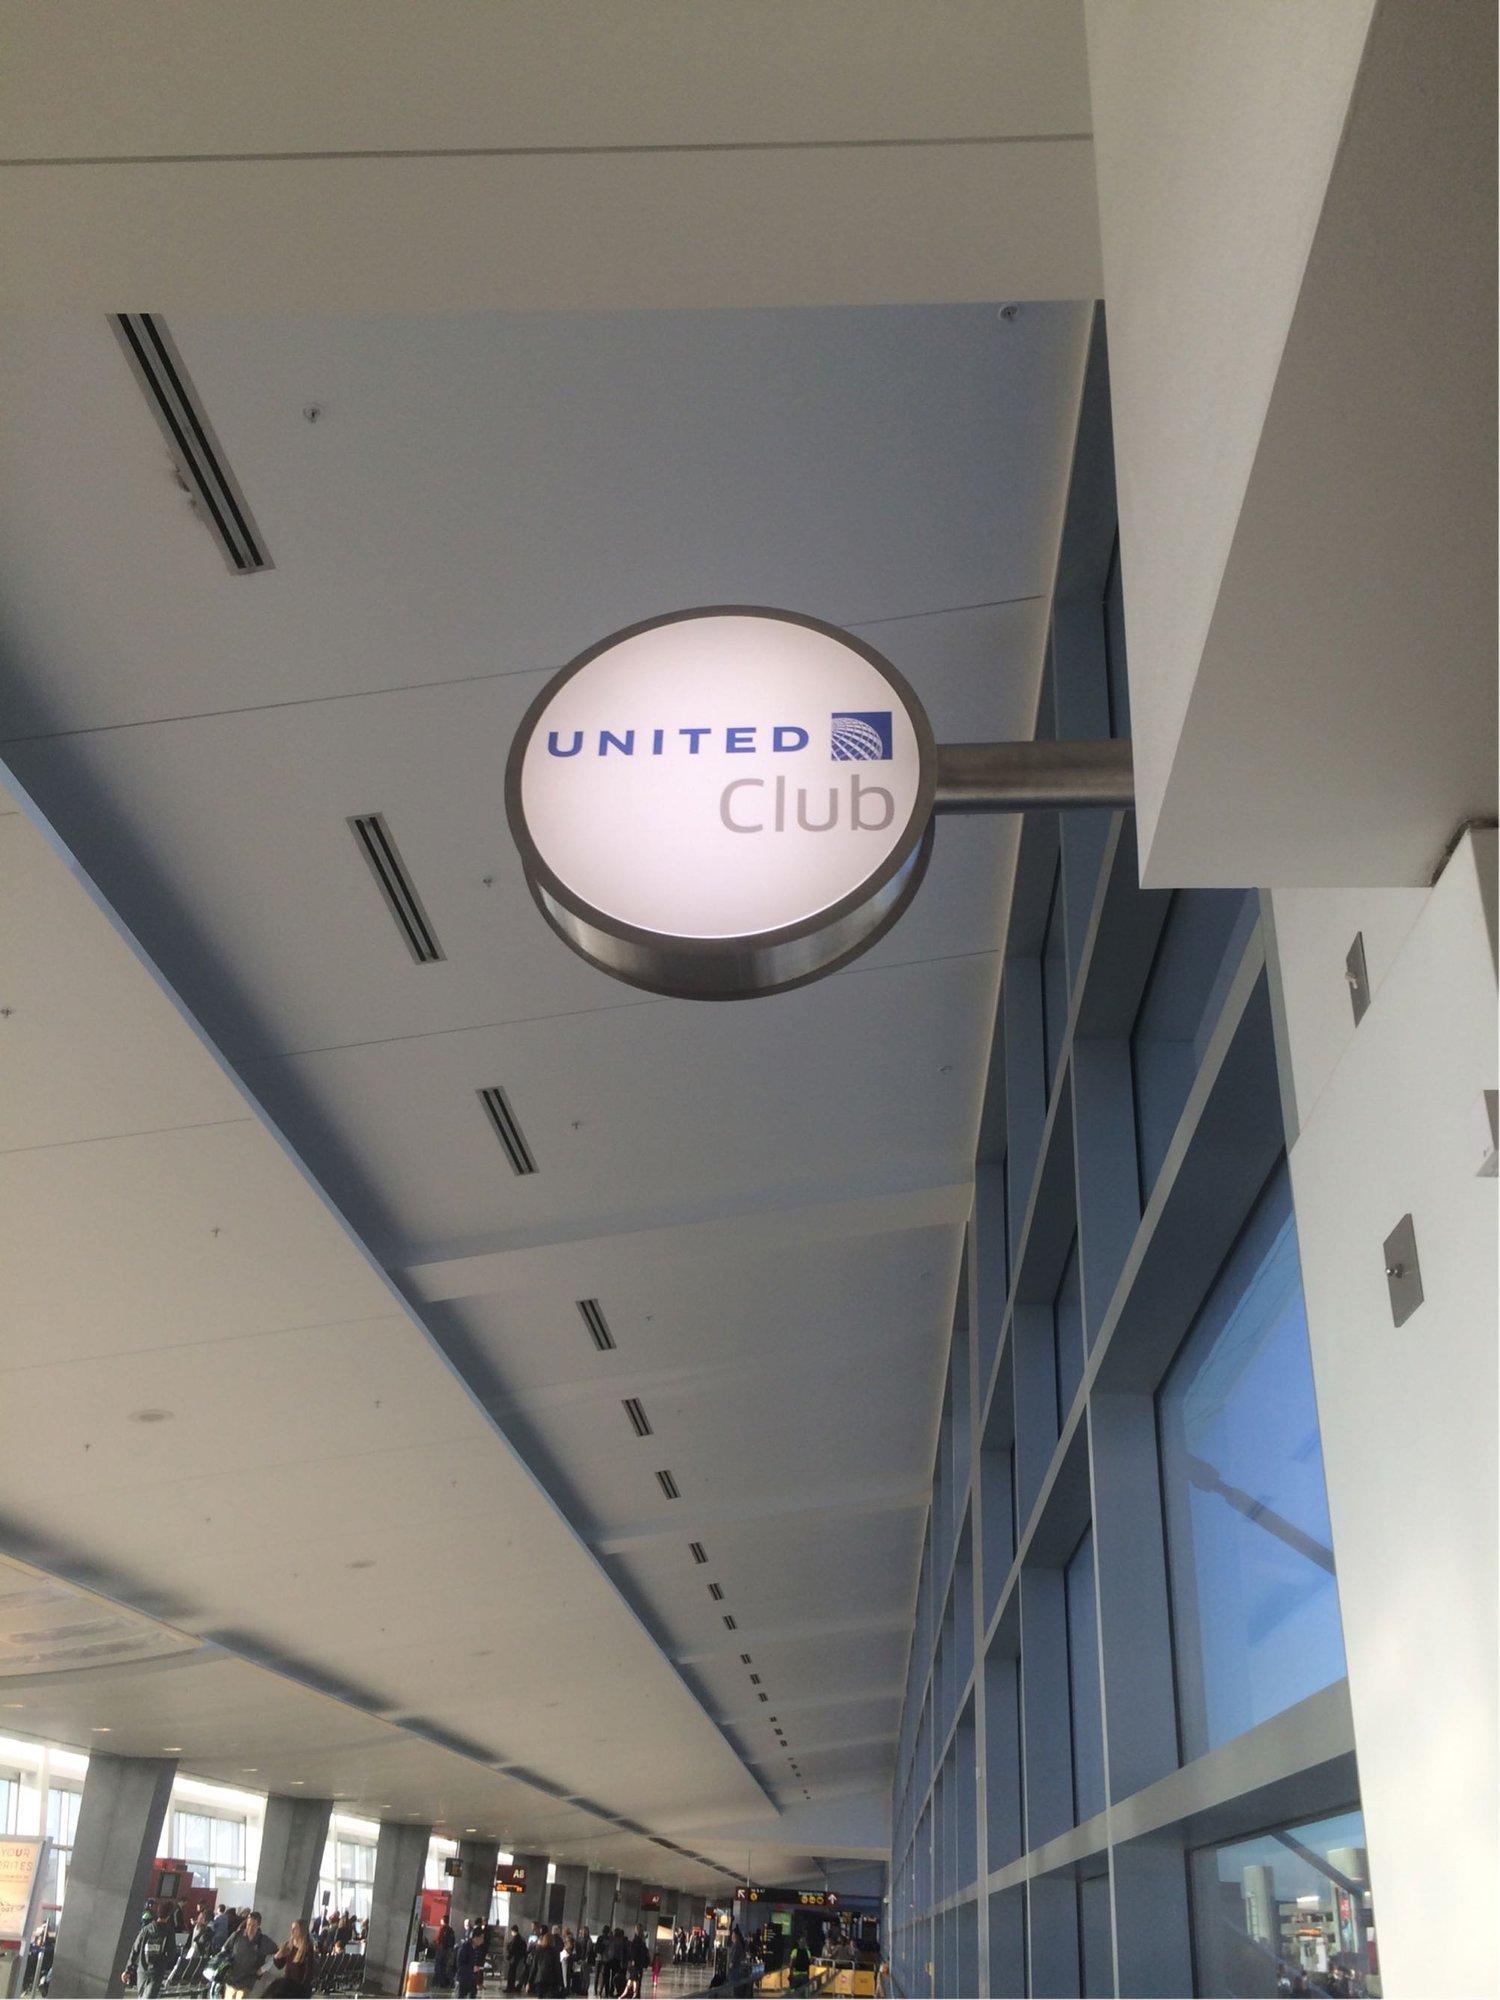 United Airlines United Club image 48 of 57